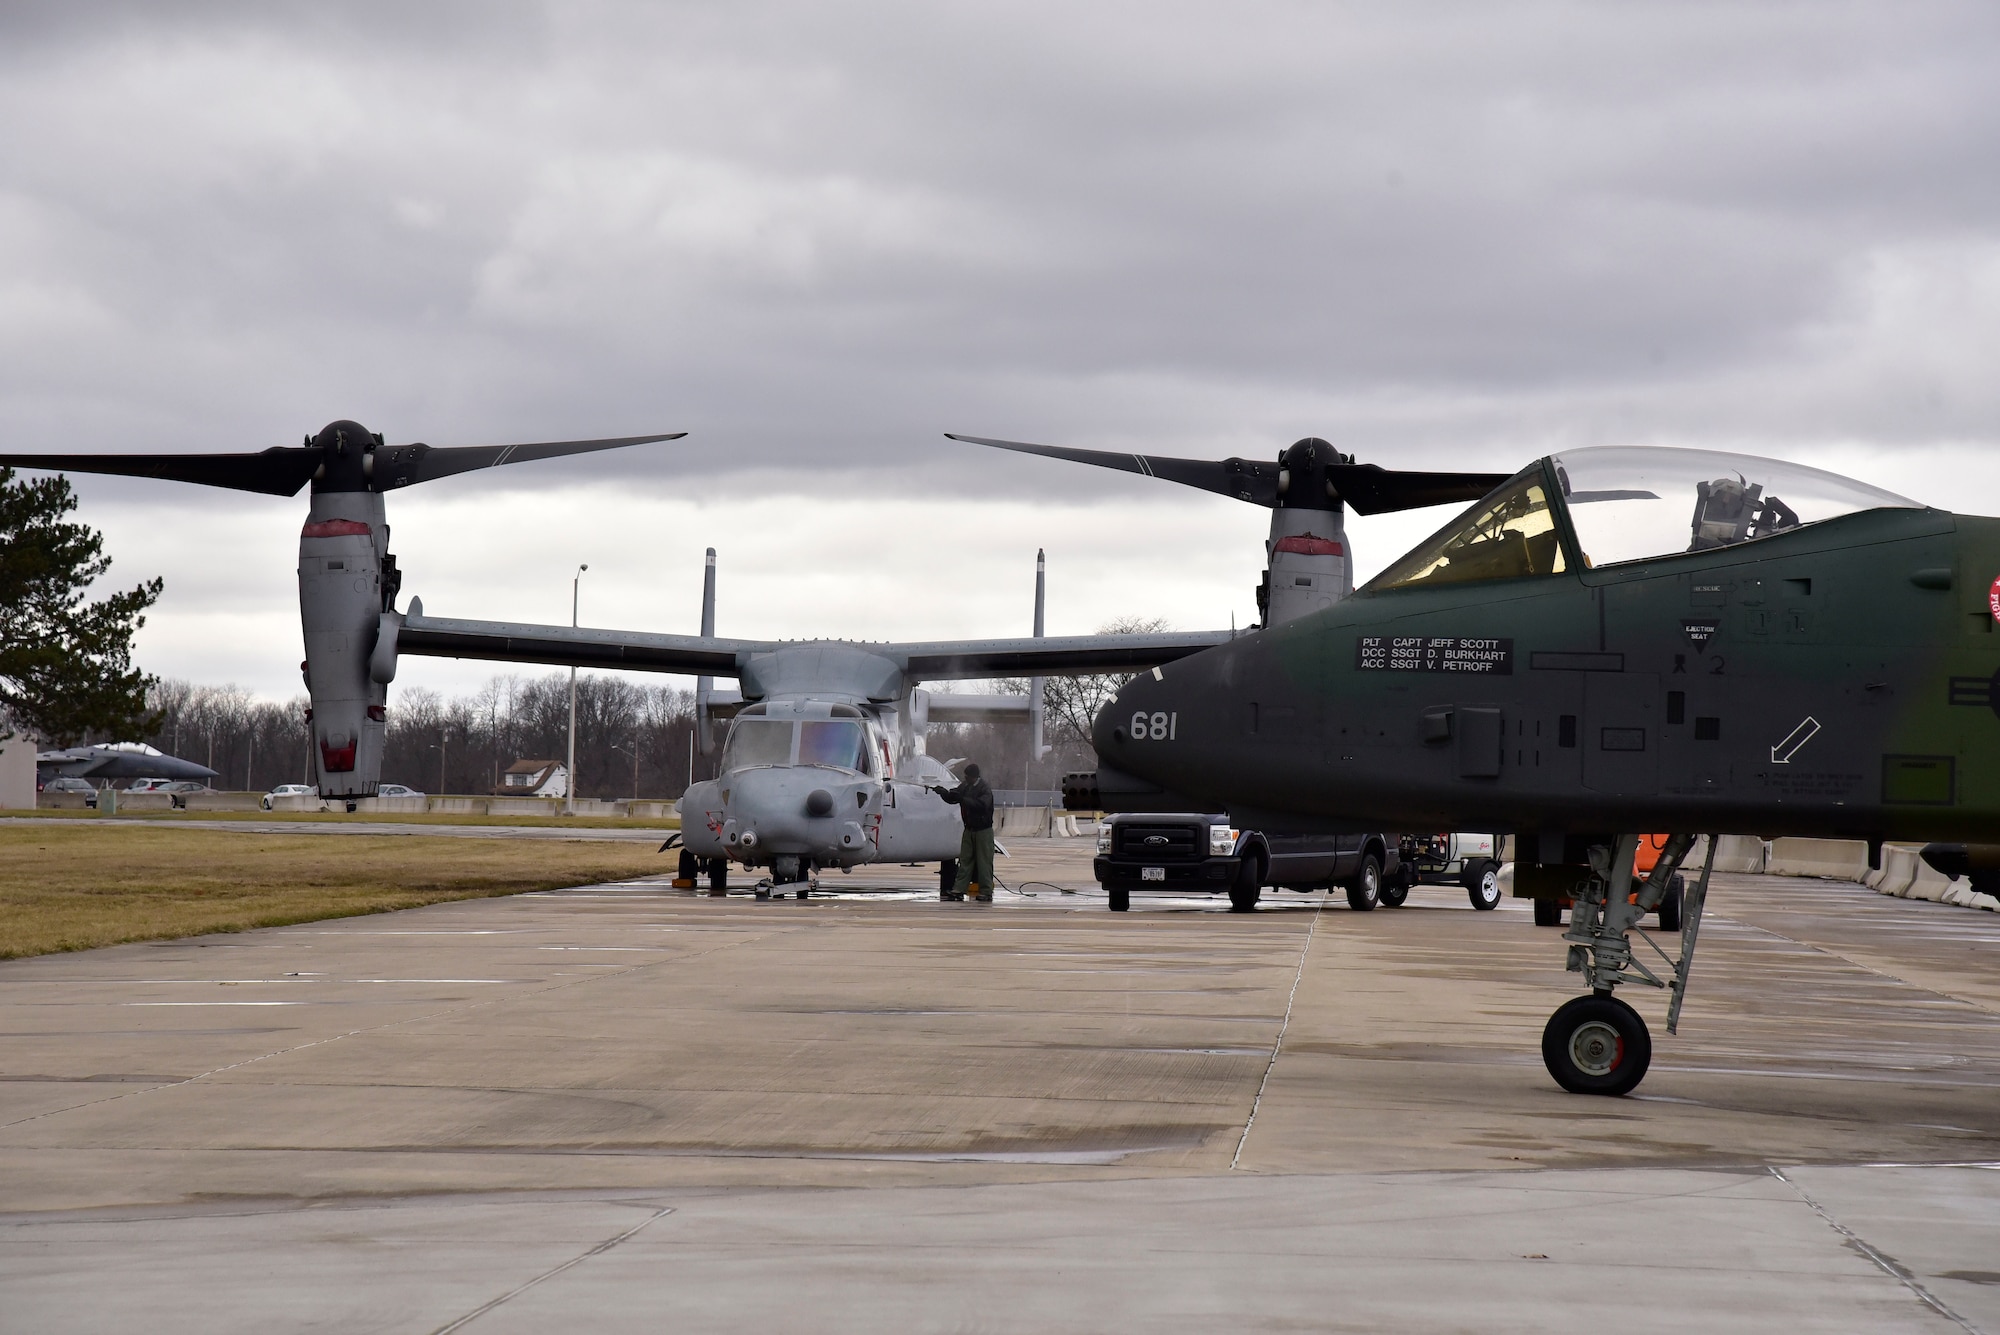 DAYTON, Ohio -- The Bell-Boeing CV-22B Osprey and the Fairchild Republic A-10A Thunderbolt II at the National Museum of the United States Air Force. The restoration crew members worked as part of a team to complete the gallery reconfiguration on Jan. 26, 2017. (U.S. Air Force photo)